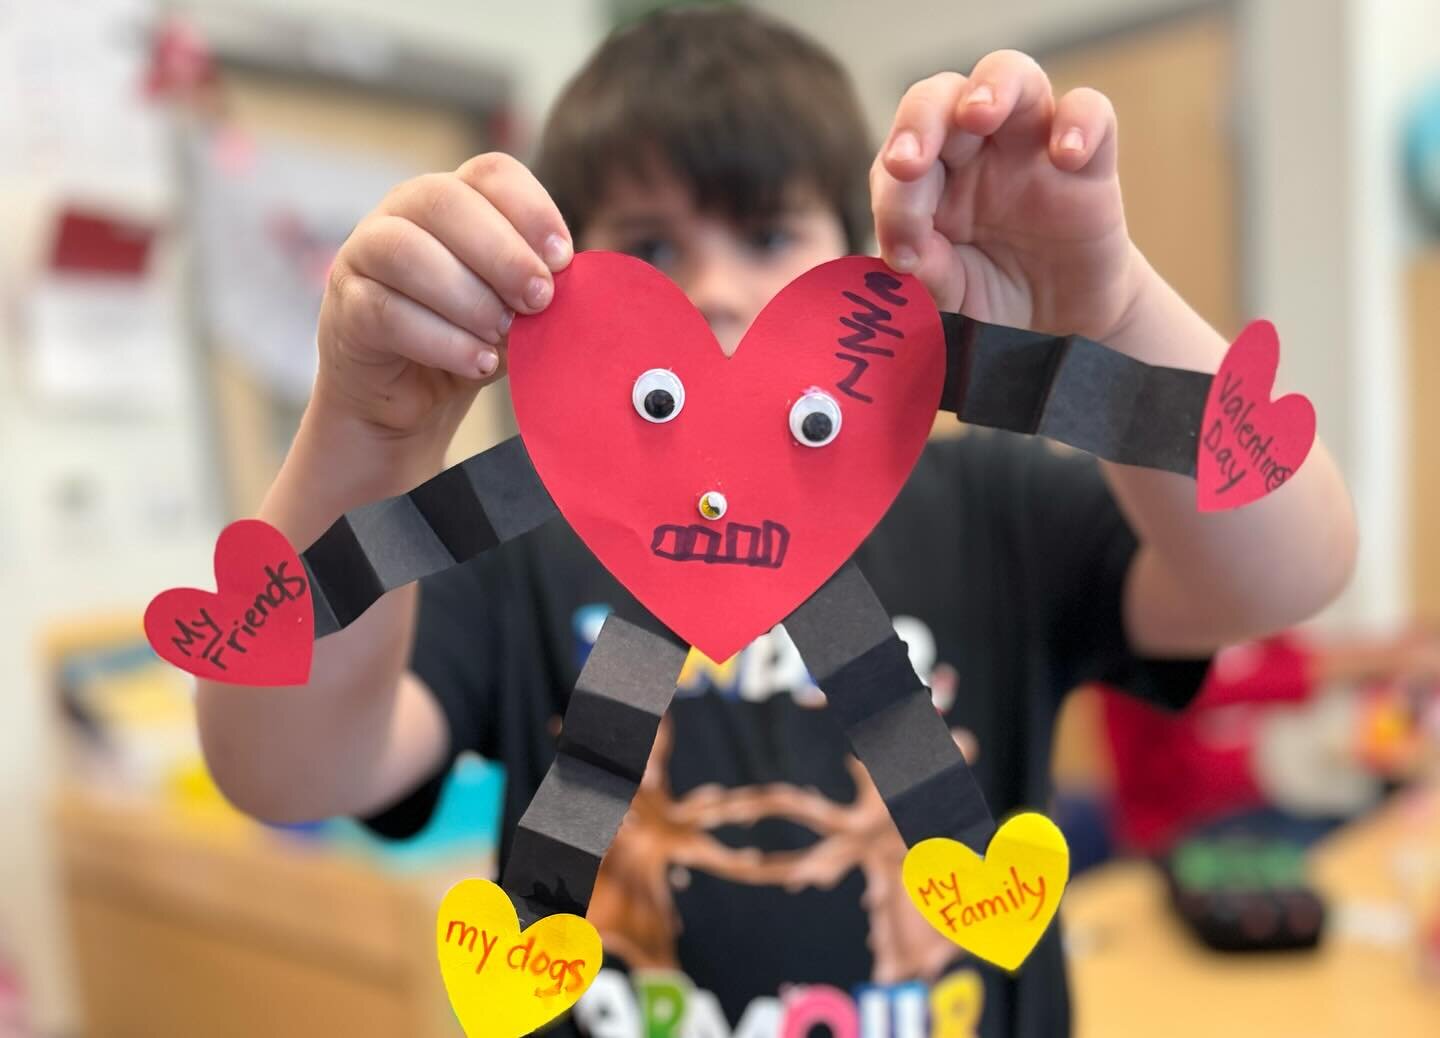 I helped out at my kiddo&rsquo;s class party today and did a Valentine&rsquo;s craft. It was the perfect first grade classroom project. And took up most of our party time. Thanks for the idea @laura_charlotte 🩷